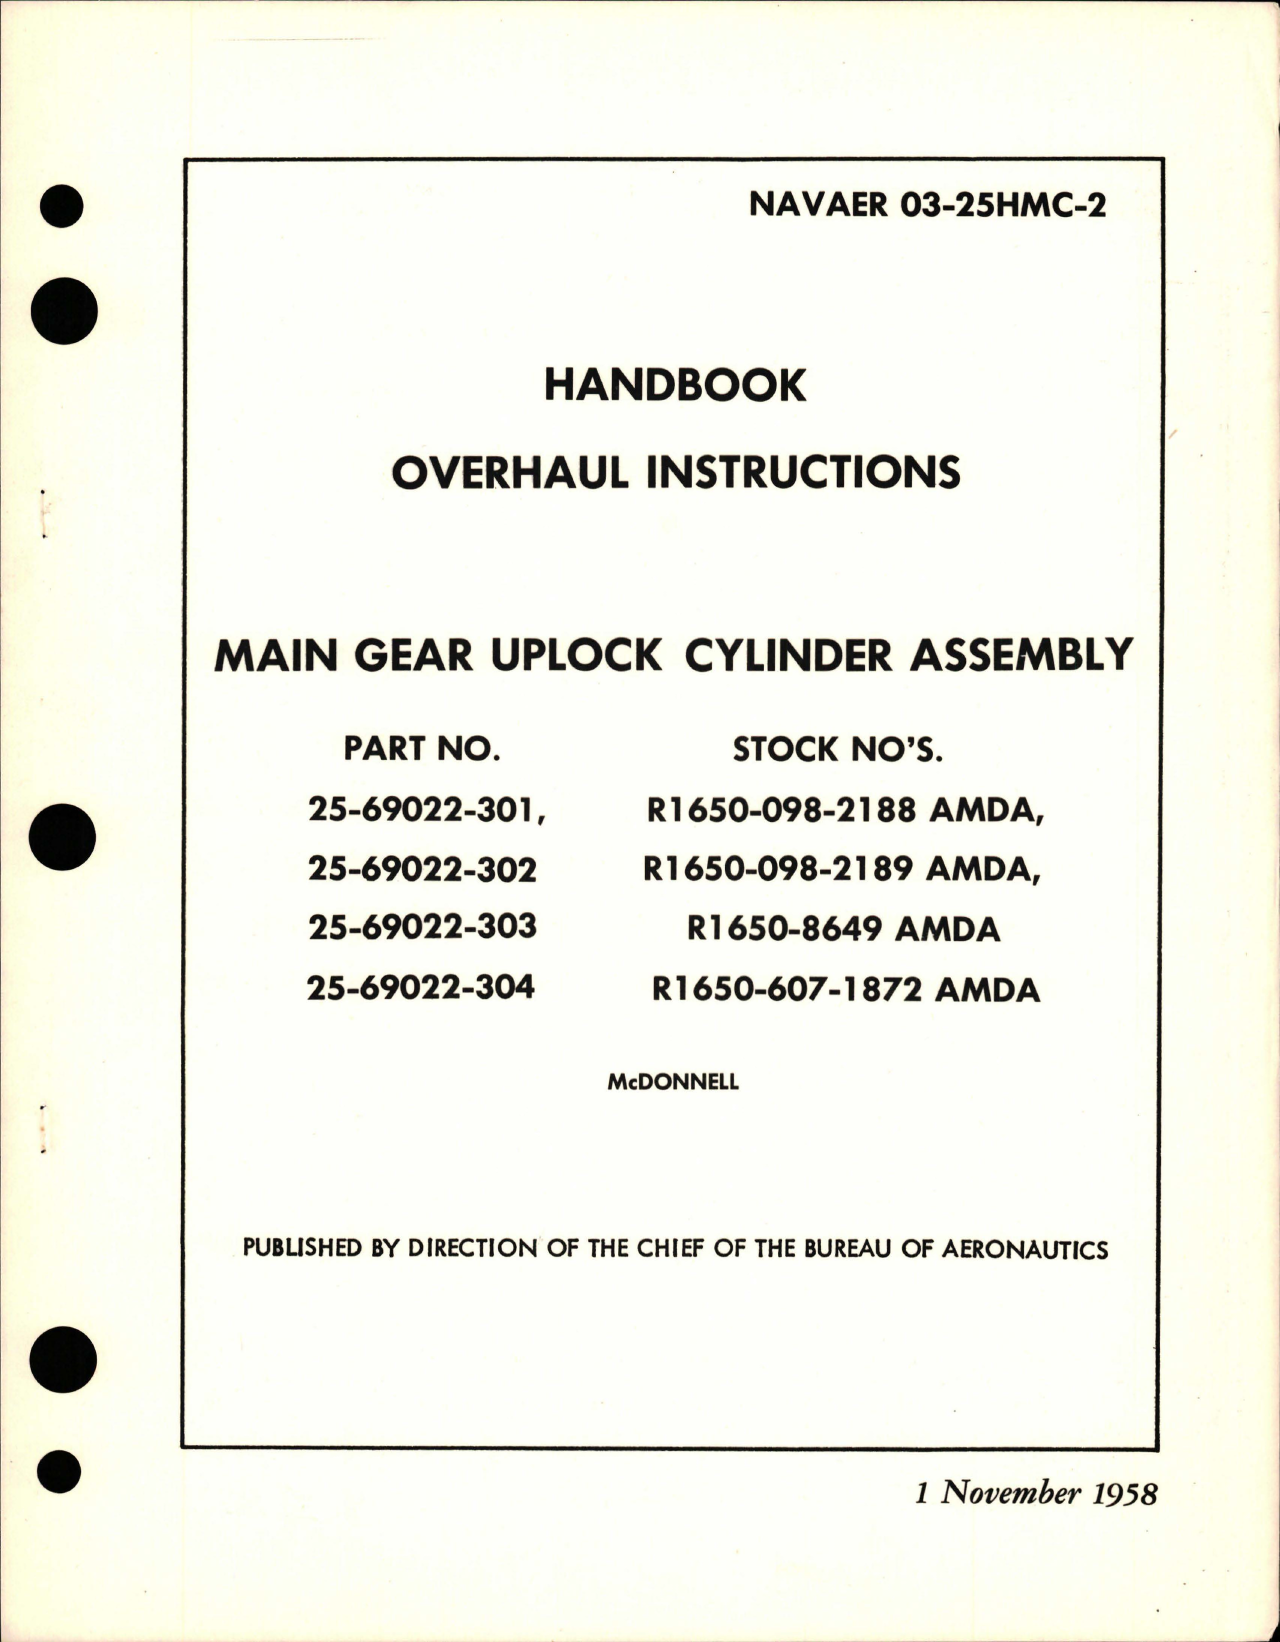 Sample page 1 from AirCorps Library document: Overhaul Instructions for Main Gear Uplock Cylinder Assembly - Parts 25-69022-301, 25-69022-302, 25-69022-303, and 5-26022-304